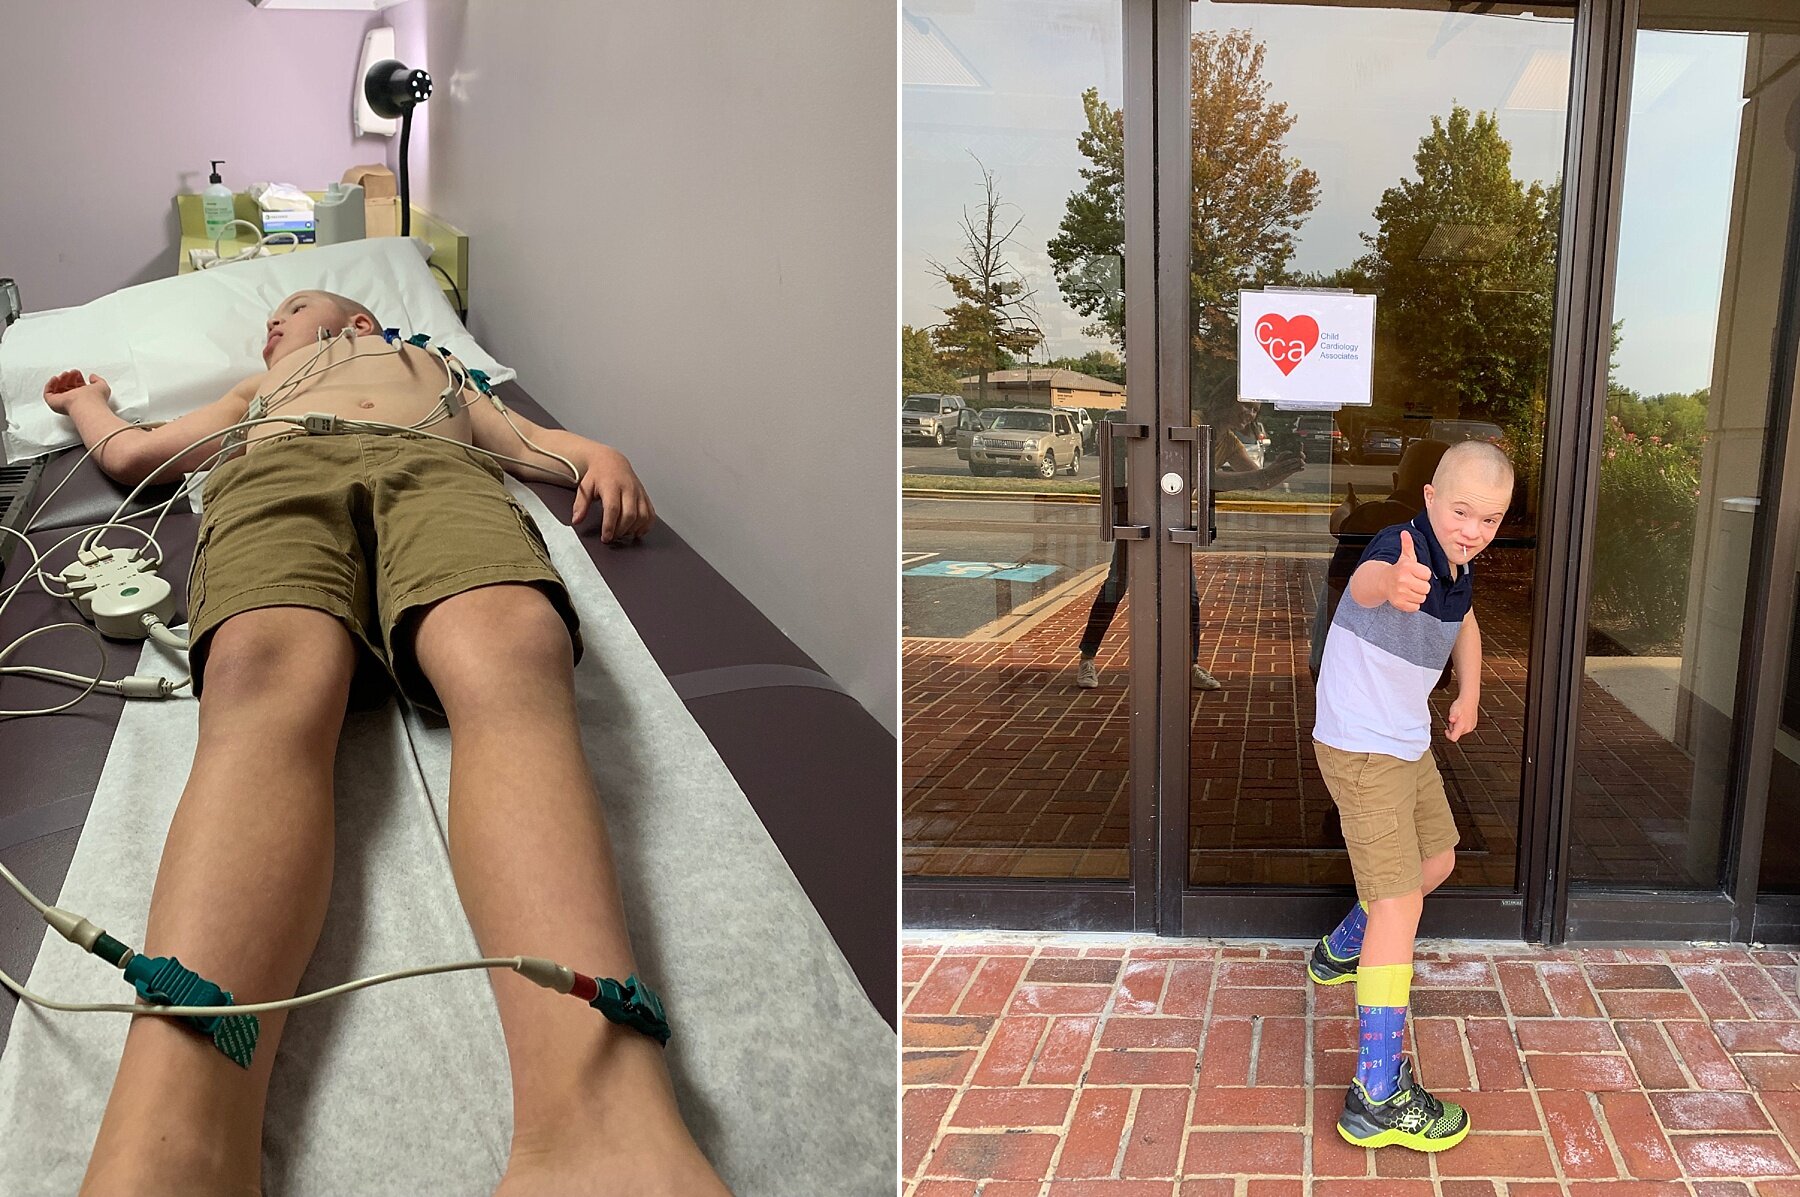 A year in review, 2019 in review, personal reflections, special needs family, Down syndrome awareness